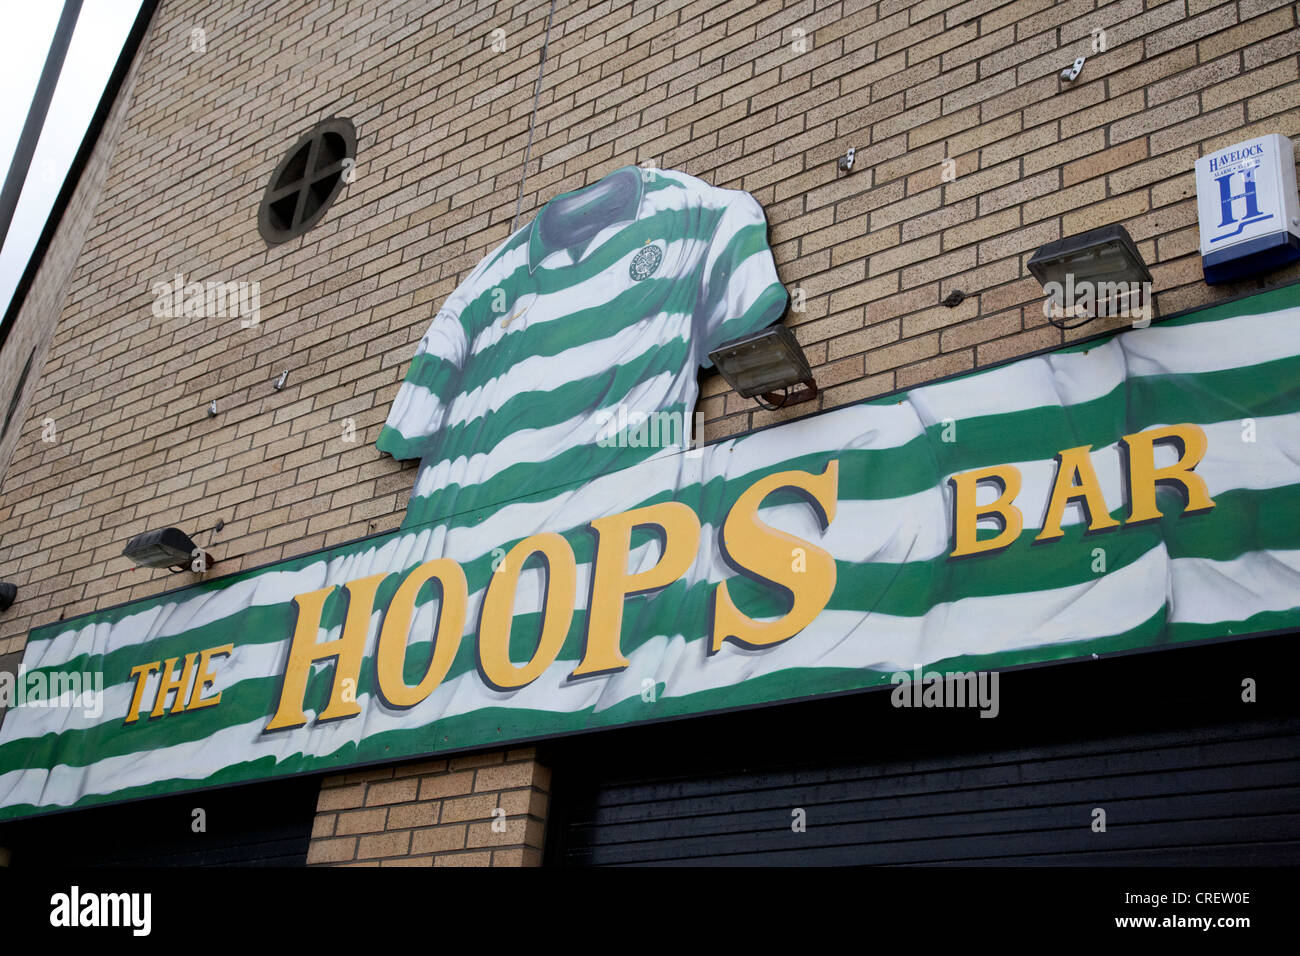 the hoops bar celtic supporters in the east end of glasgow scotland uk Stock Photo